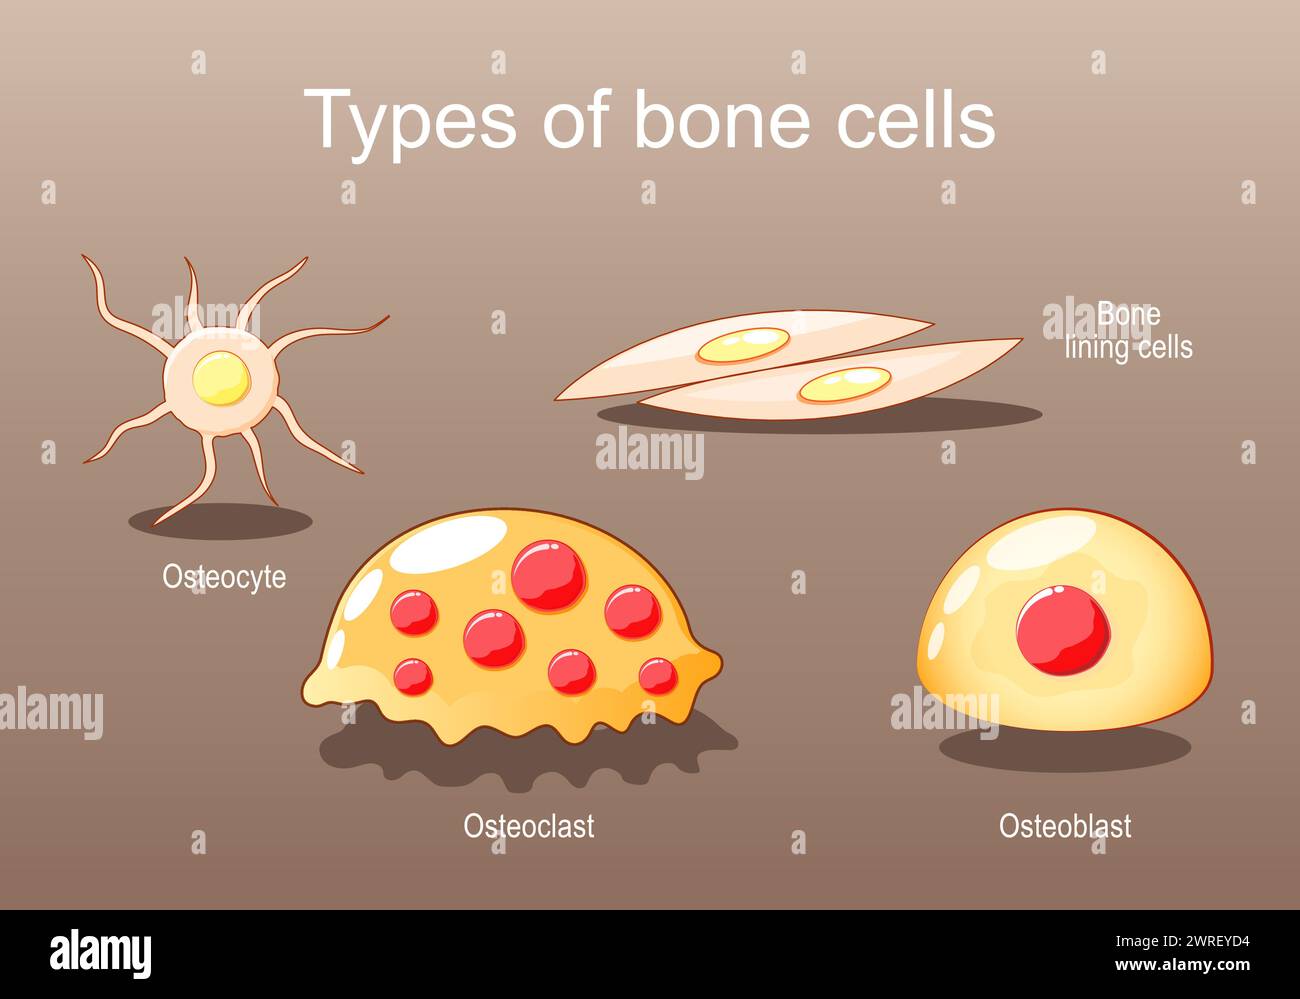 Types of bone cells for Bone formation, resorption and remodeling. Osteocyte, lining cells, osteoblast, osteoclast. Osteogenesis. Isometric flat vecto Stock Vector